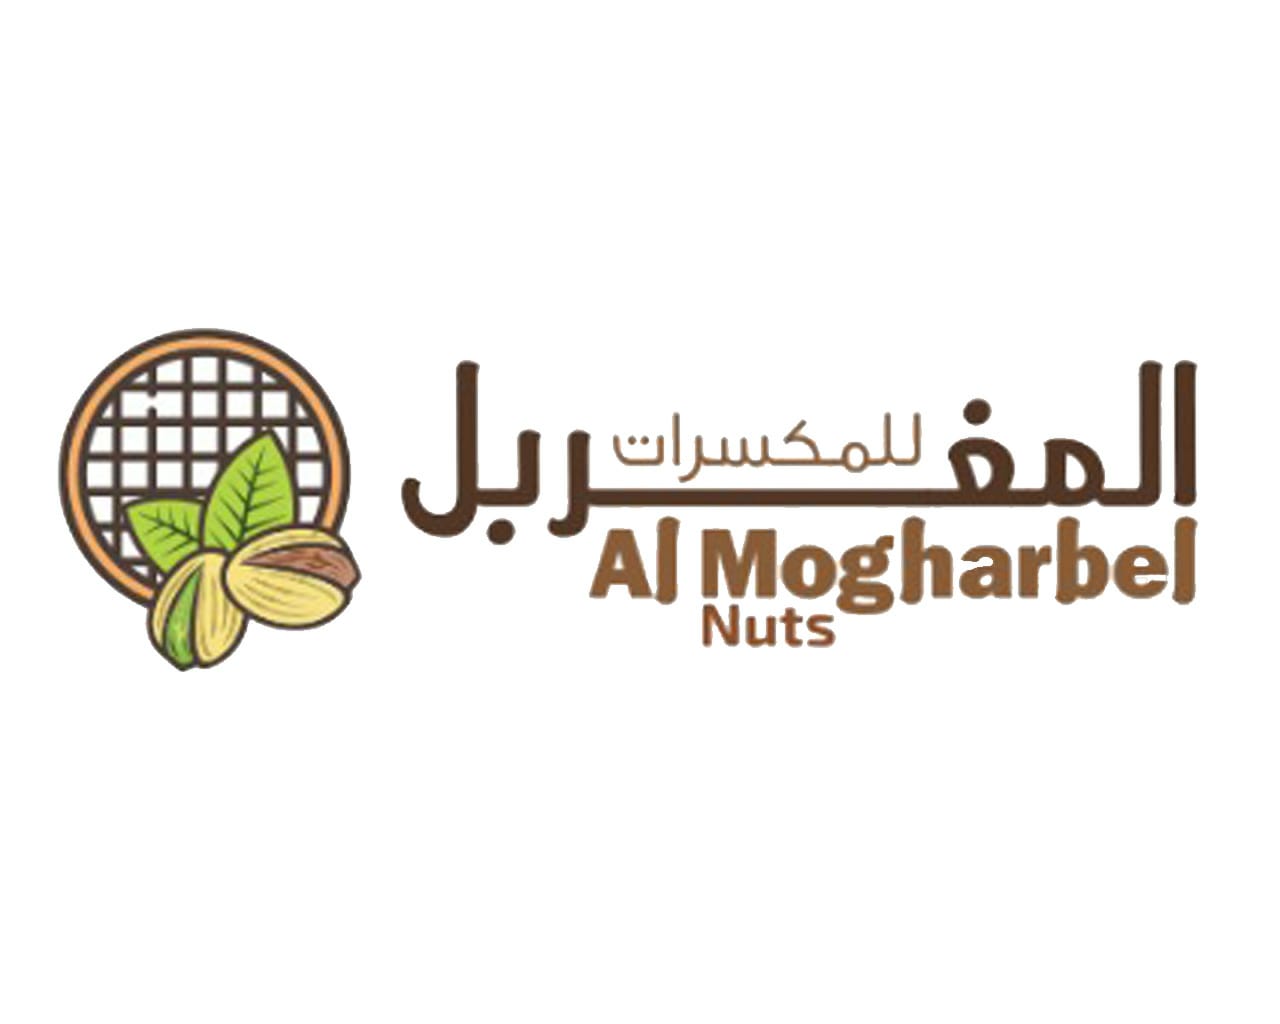 Almogharbel for Nuts